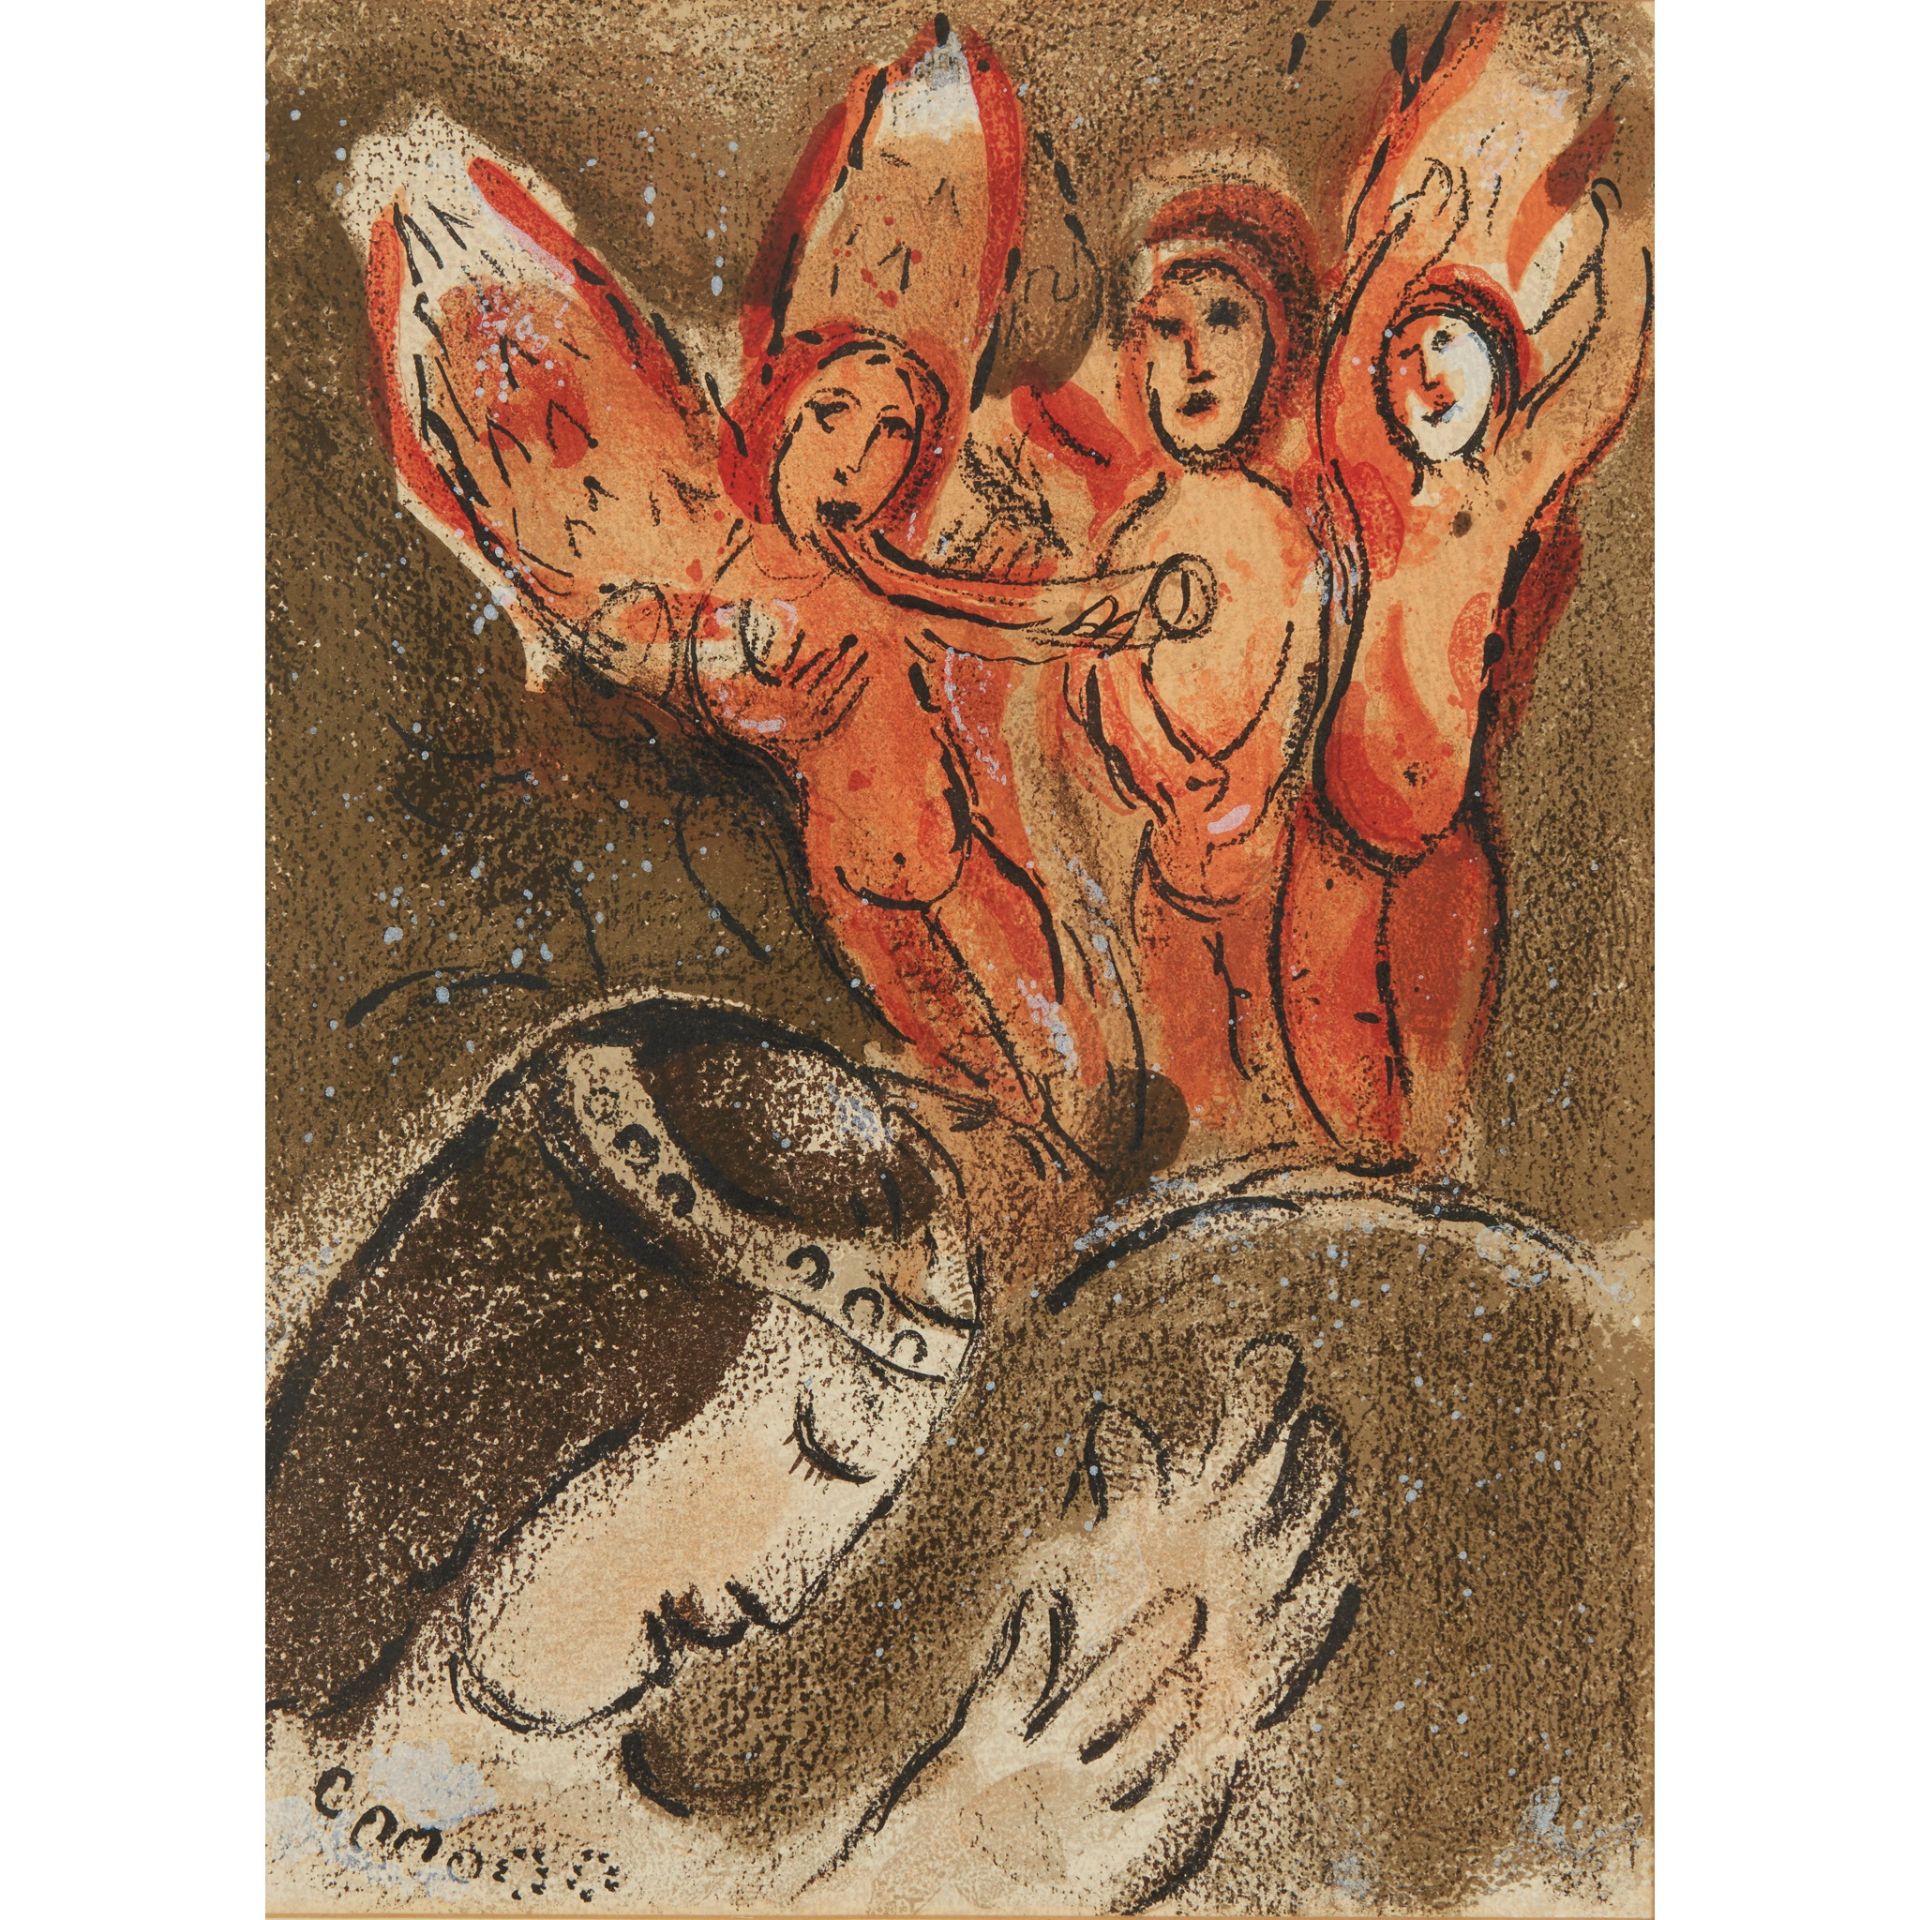 § MARC CHAGALL (RUSSIAN/FRENCH 1887-1985) SARAH AND THE THREE ANGELS - 'FROM 'DRAWINGS FOR THE